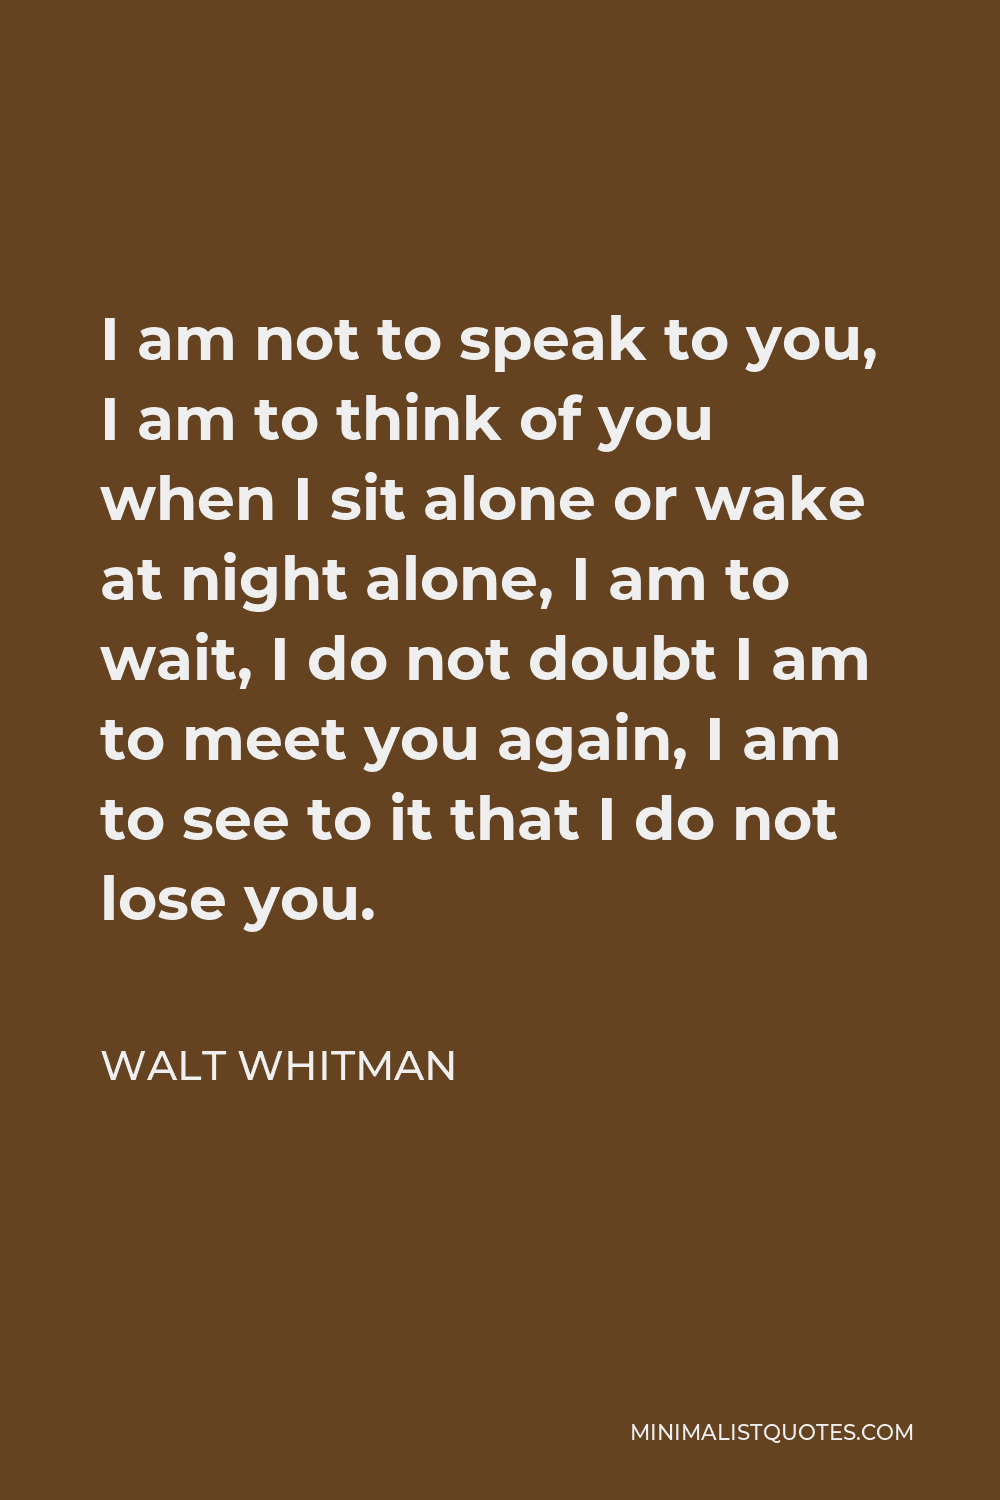 Walt Whitman Quote - I am not to speak to you, I am to think of you when I sit alone or wake at night alone, I am to wait, I do not doubt I am to meet you again, I am to see to it that I do not lose you.